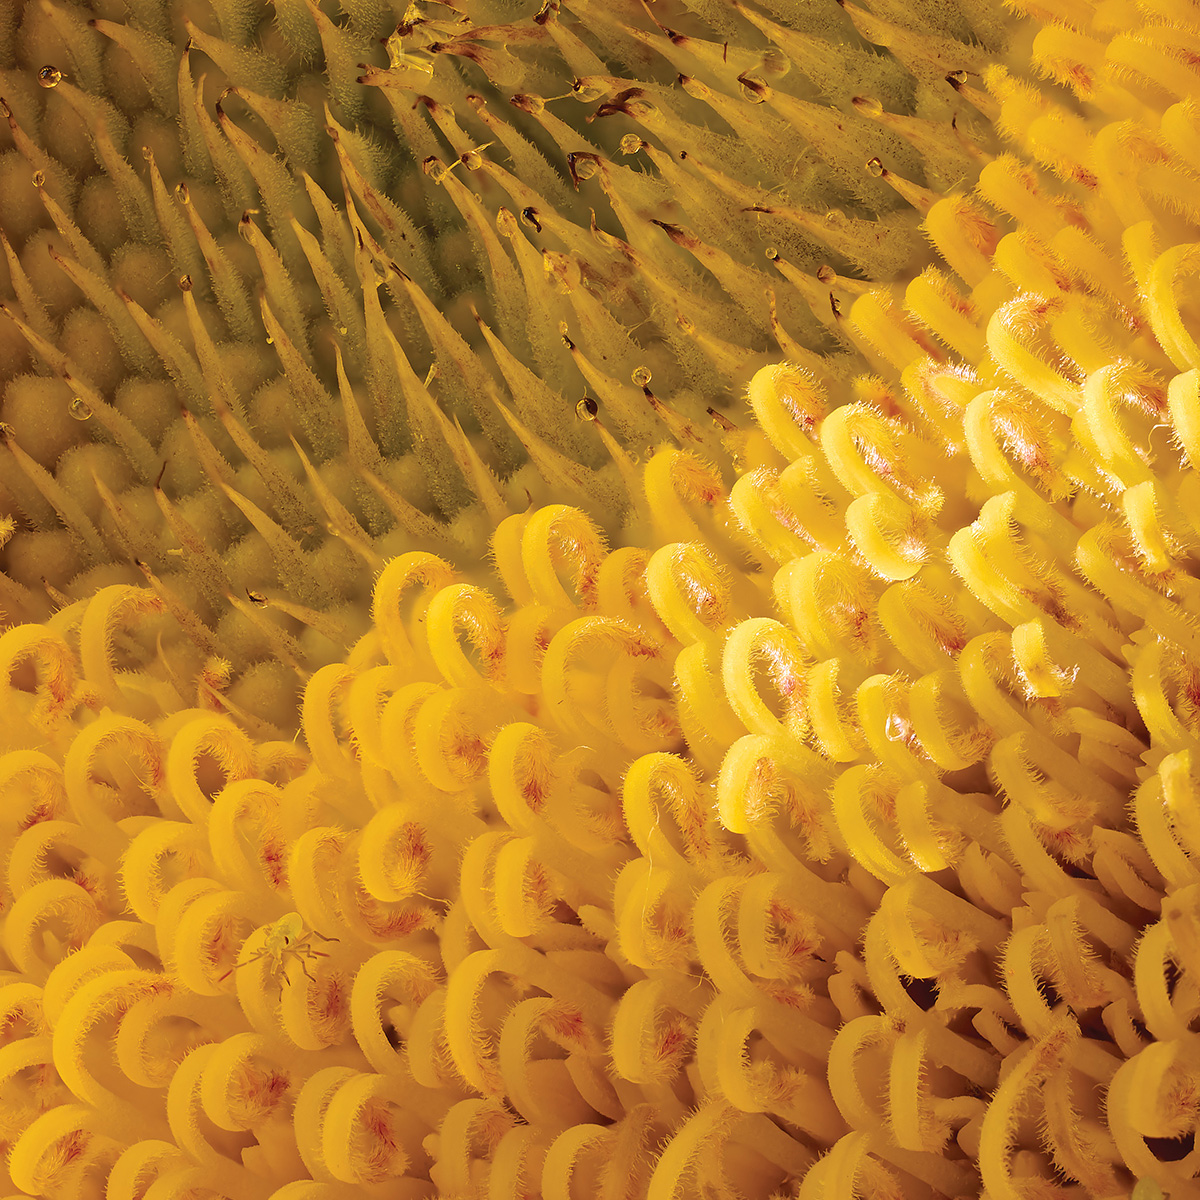 Extreme closeup of part of the center of a sunflower blossom